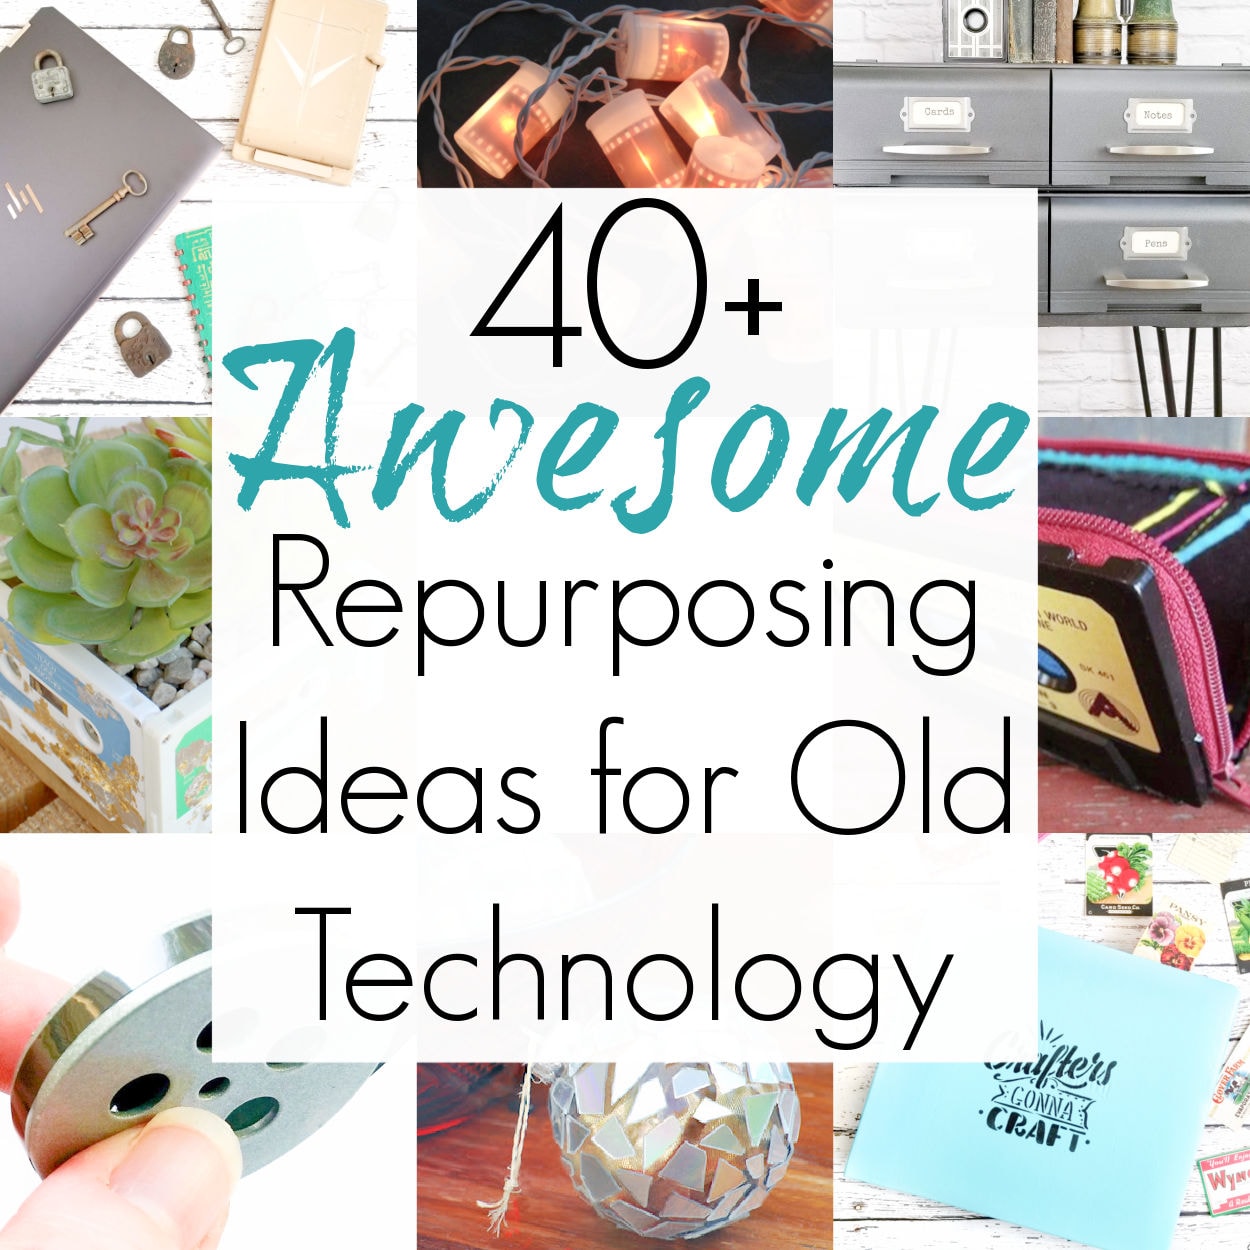 Repurposing Projects for Old Technology